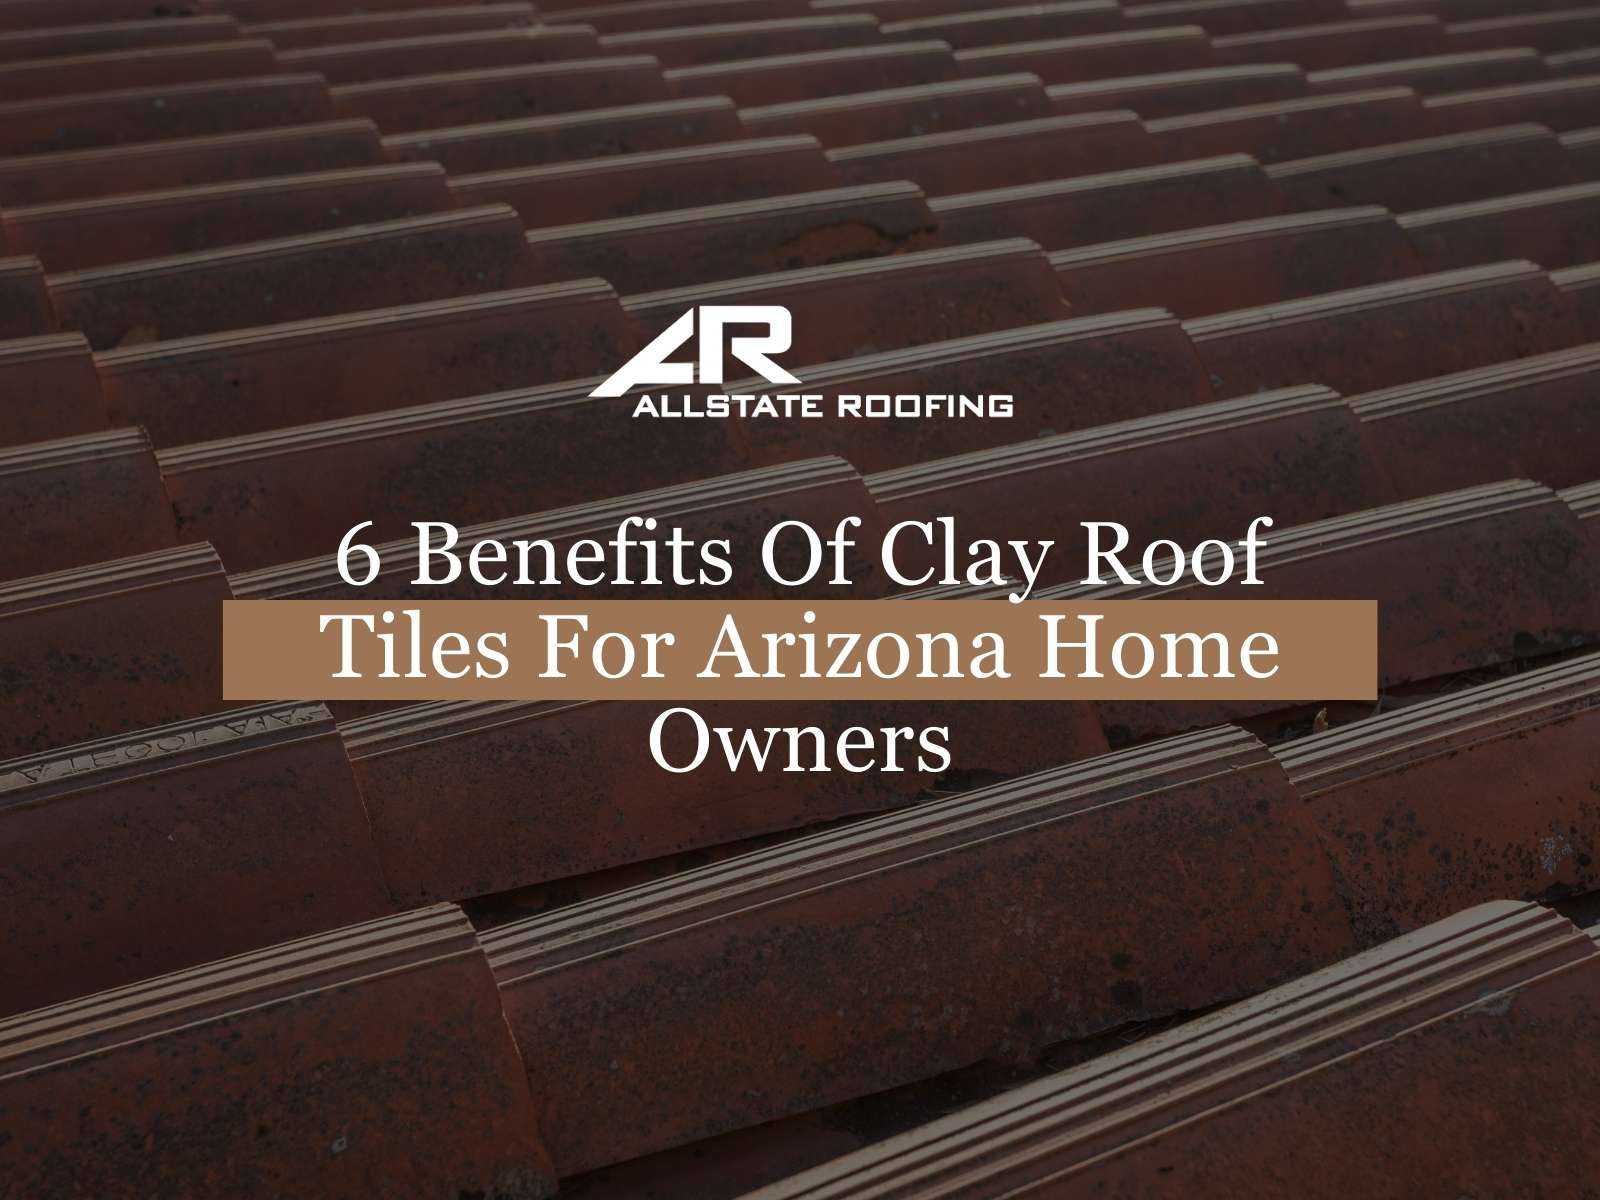 6 Benefits Of Clay Roof Tiles For Arizona Home Owners